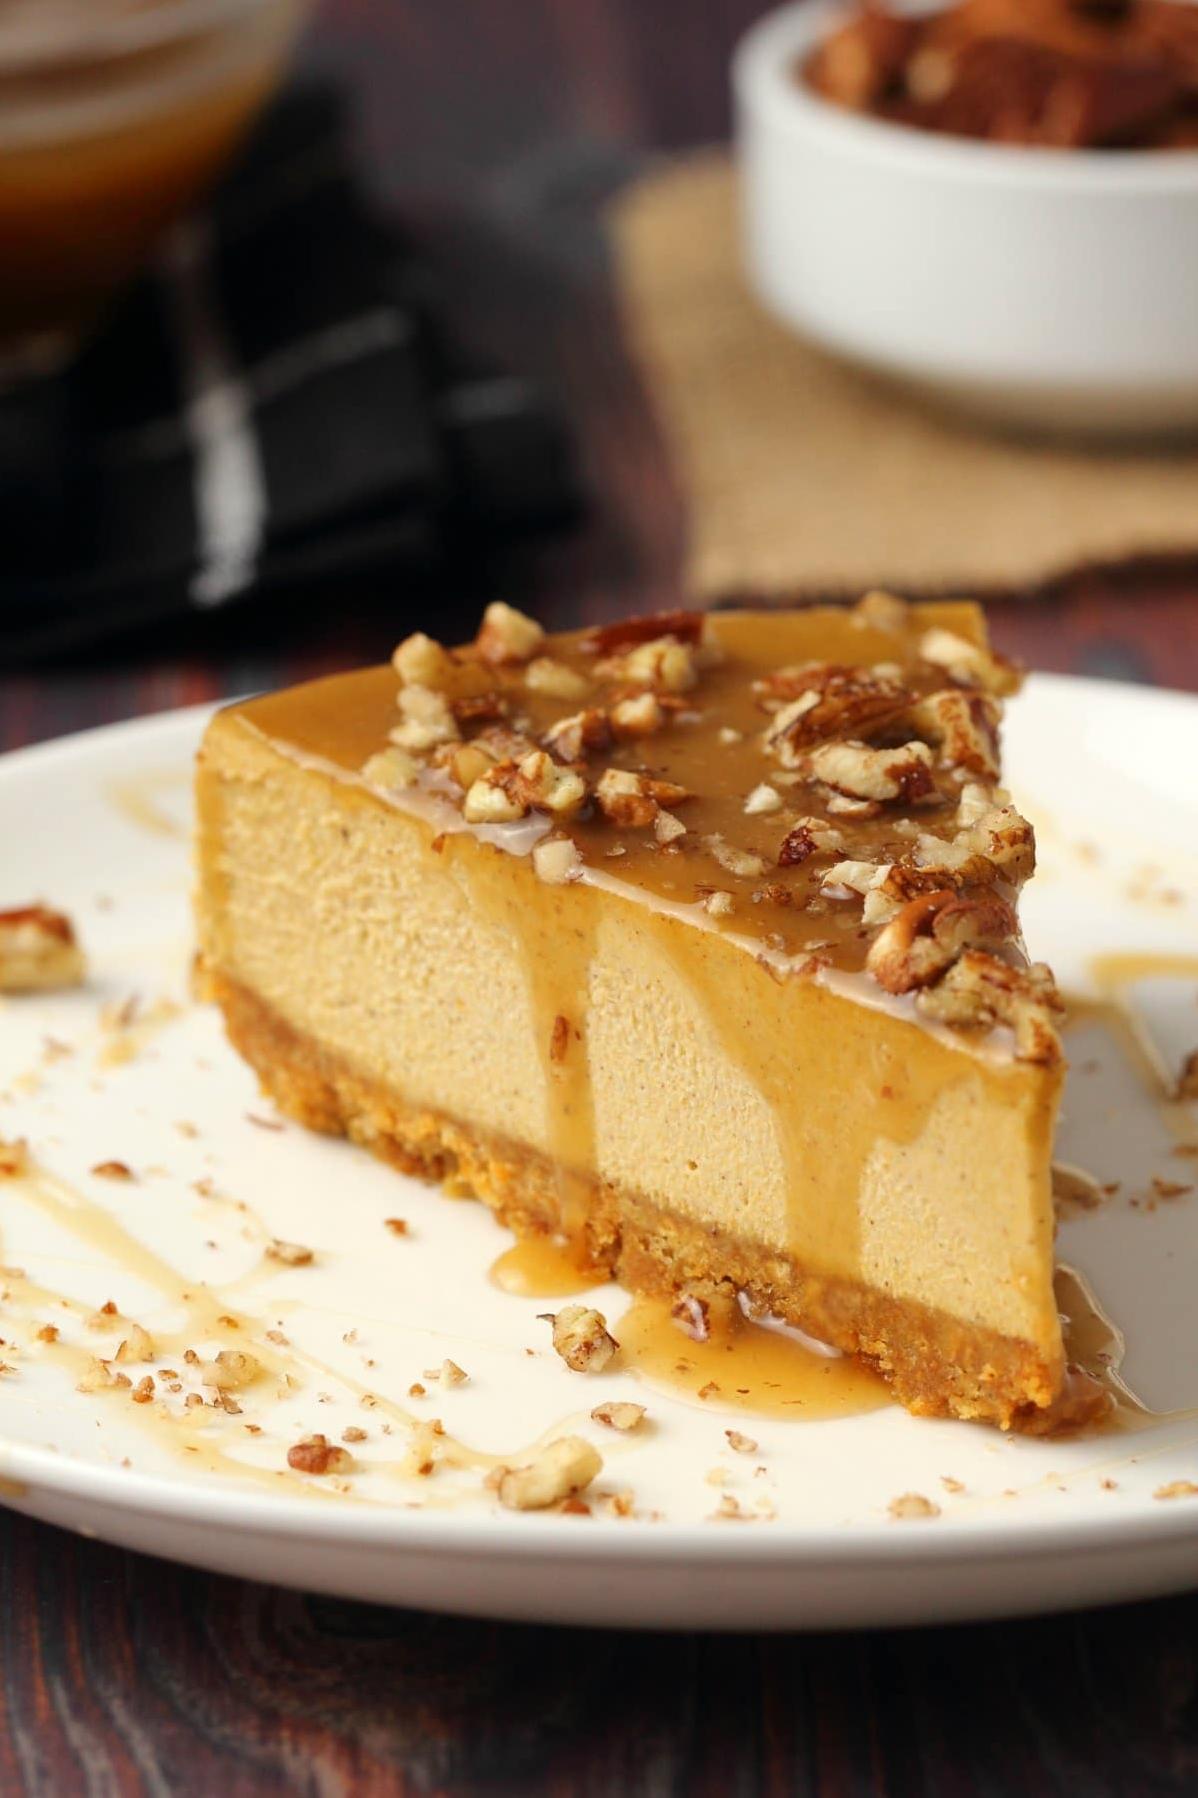  Say goodbye to tummy troubles after eating cheesecake with this recipe.